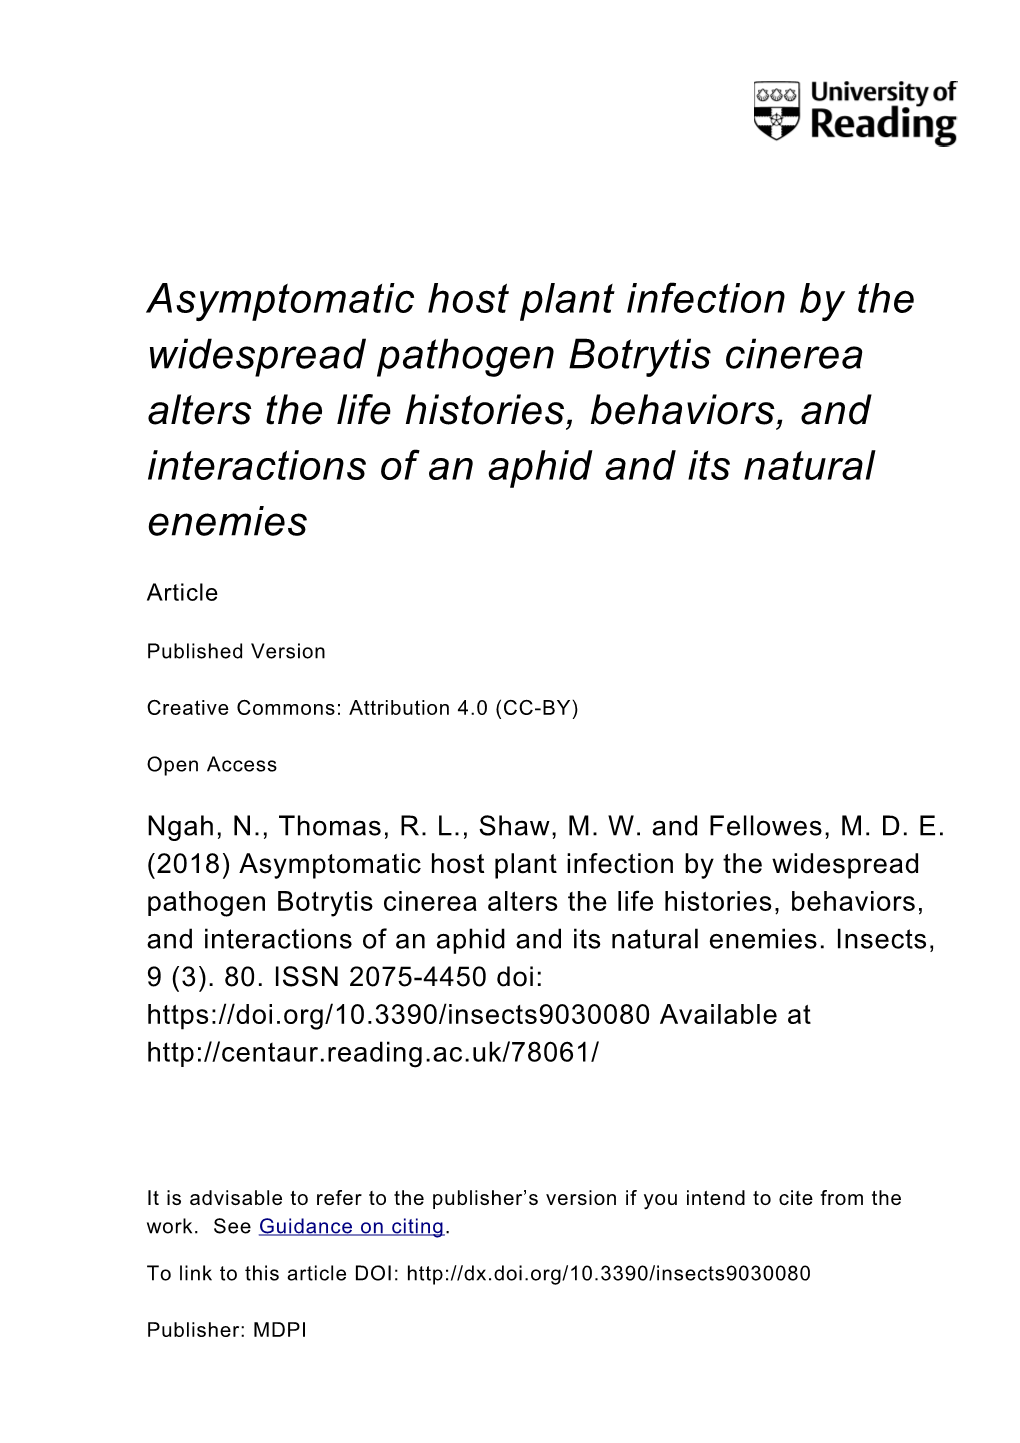 Asymptomatic Host Plant Infection by the Widespread Pathogen Botrytis